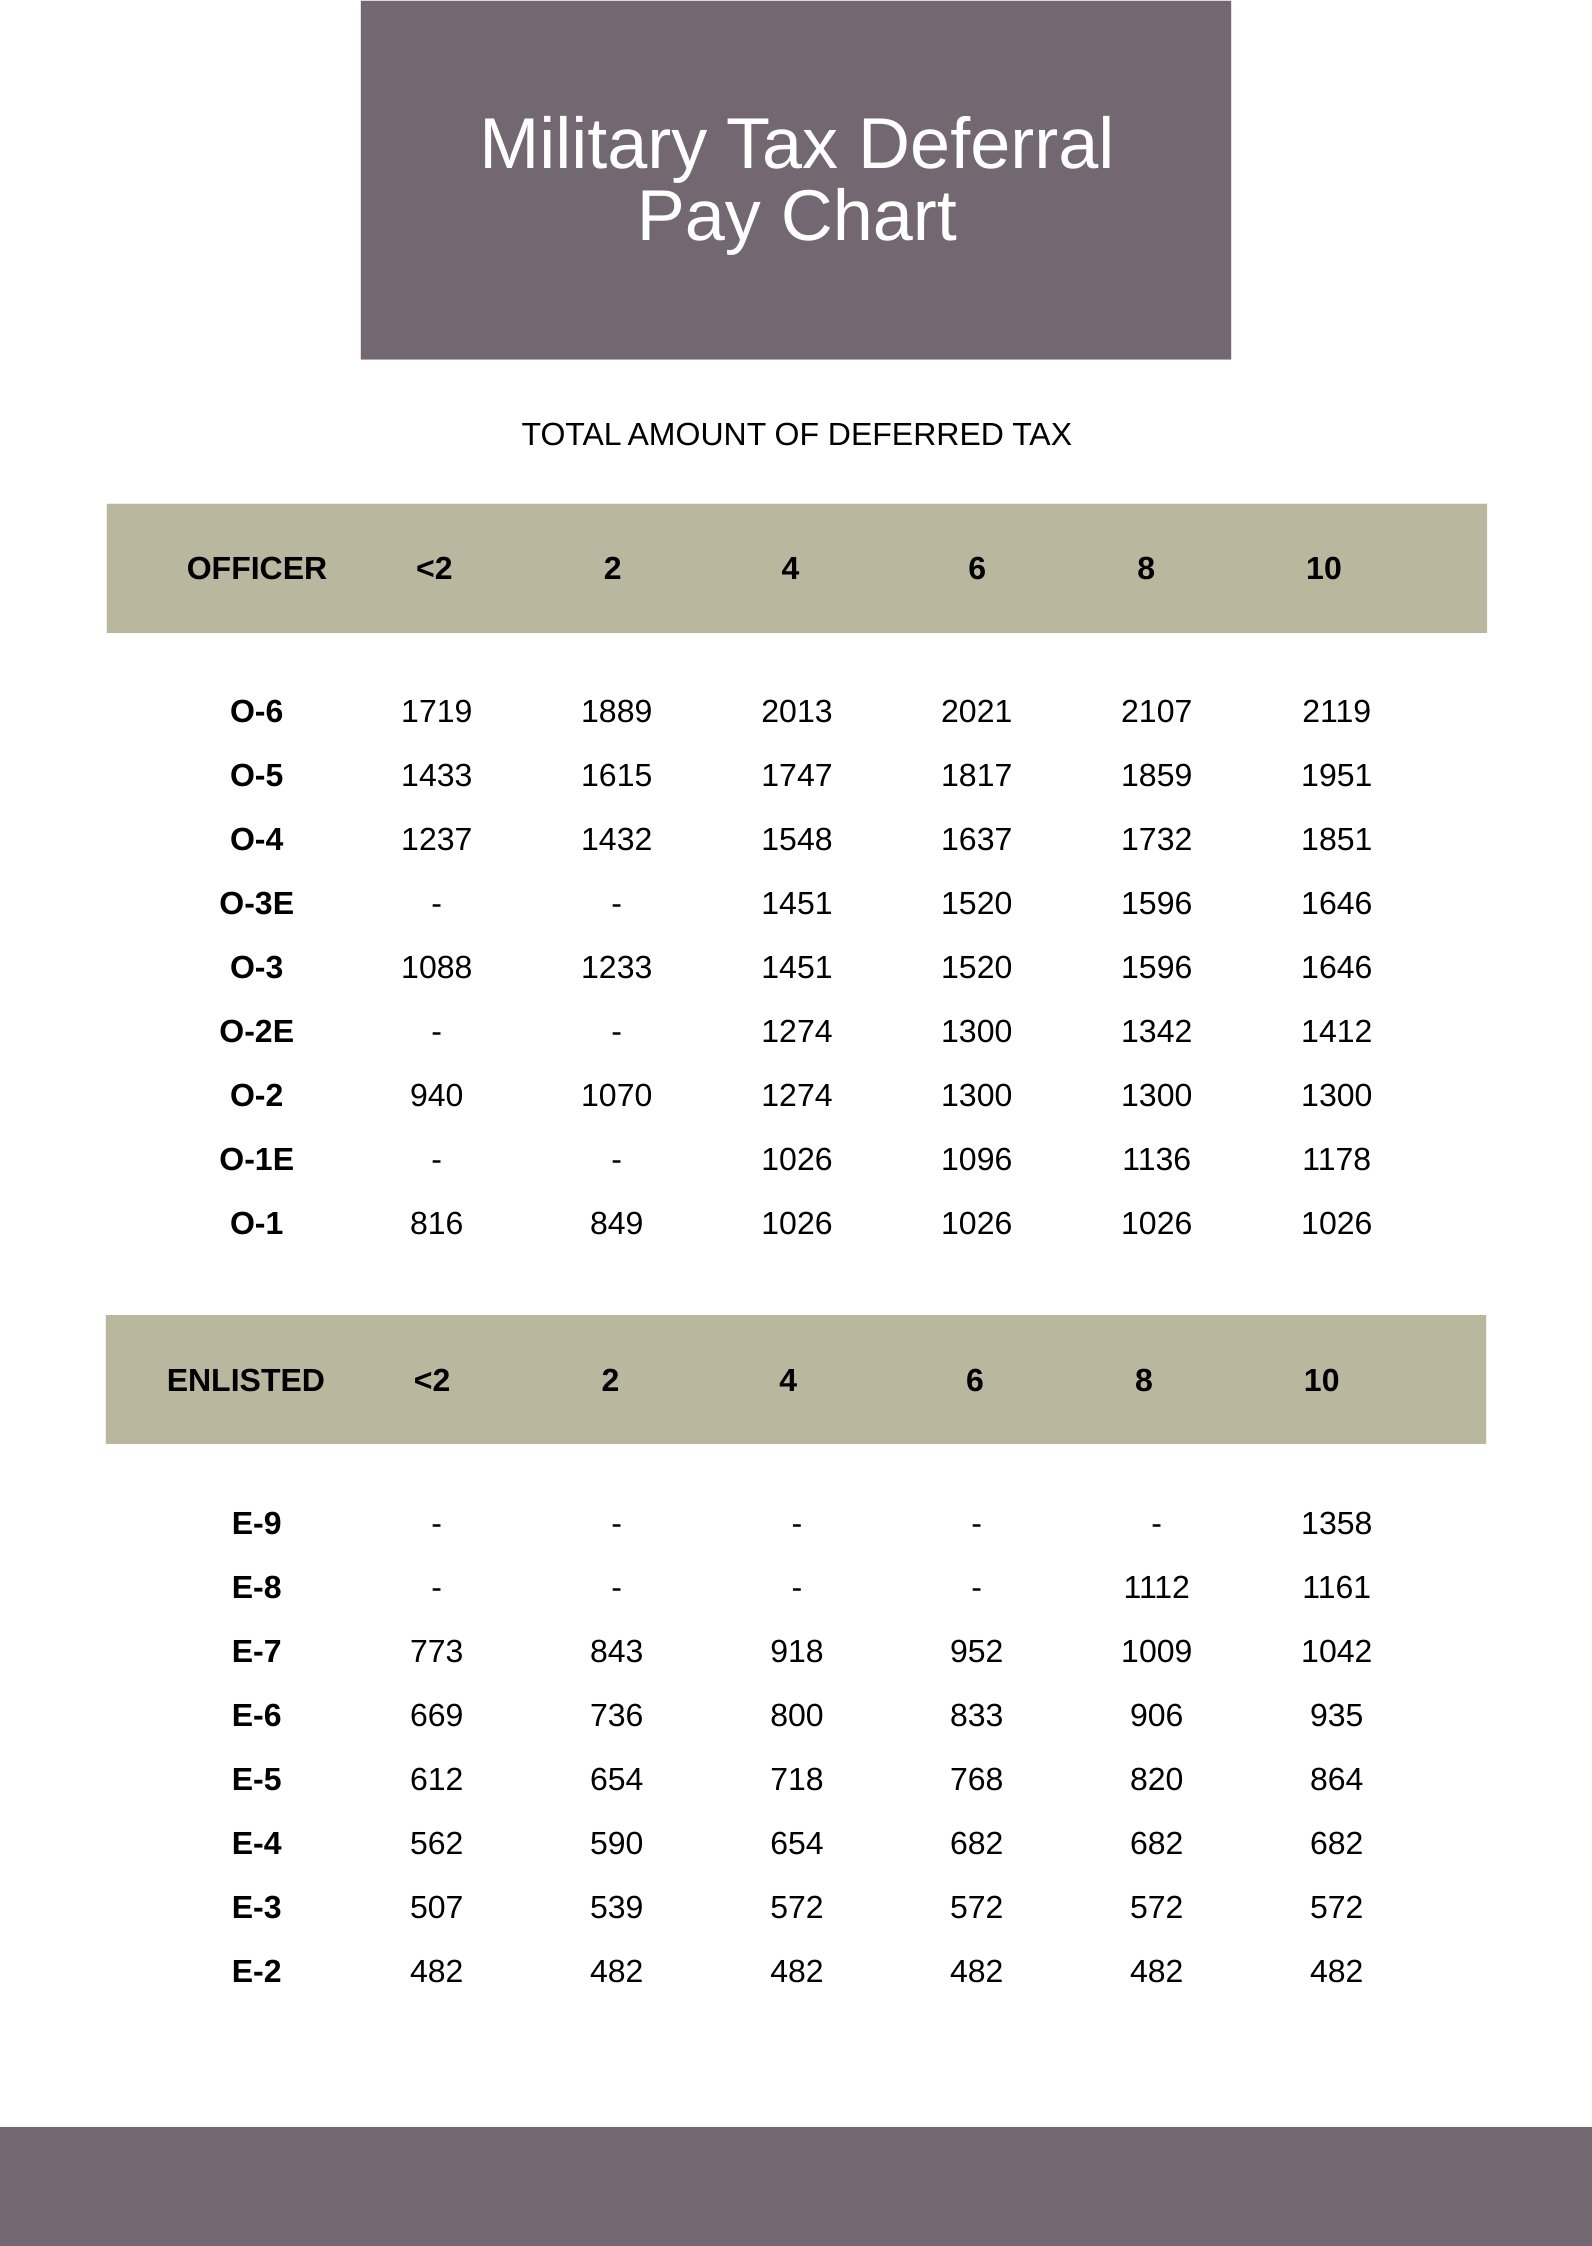 Free Military Tax Deferral Pay Chart